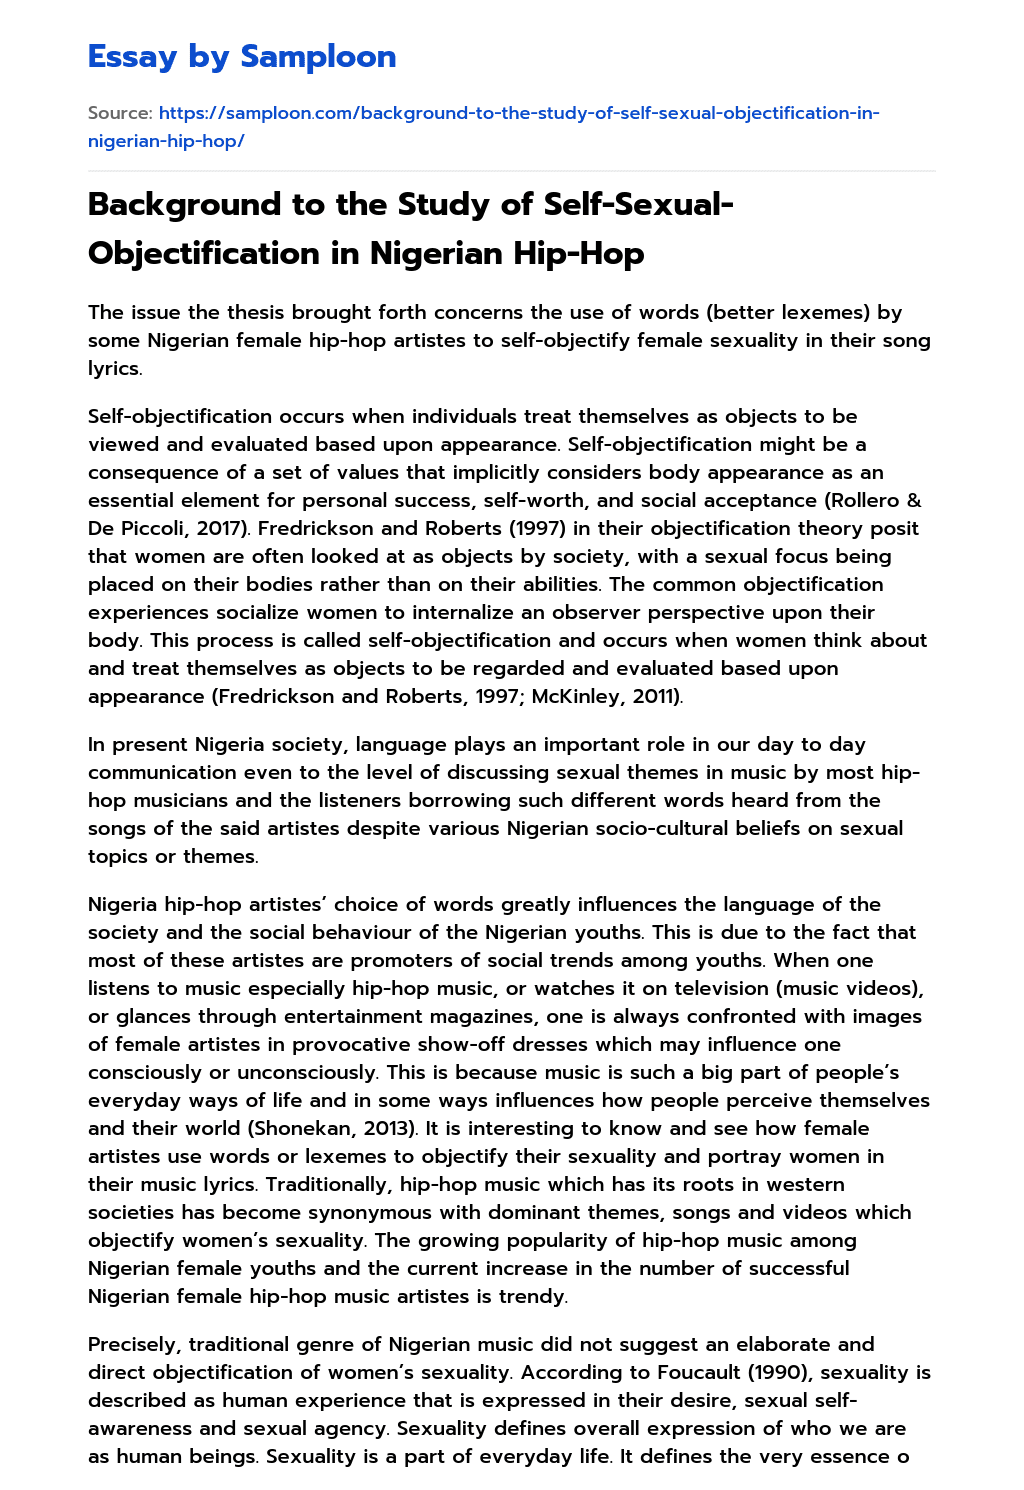 Background to the Study of Self-Sexual-Objectification in Nigerian Hip-Hop essay